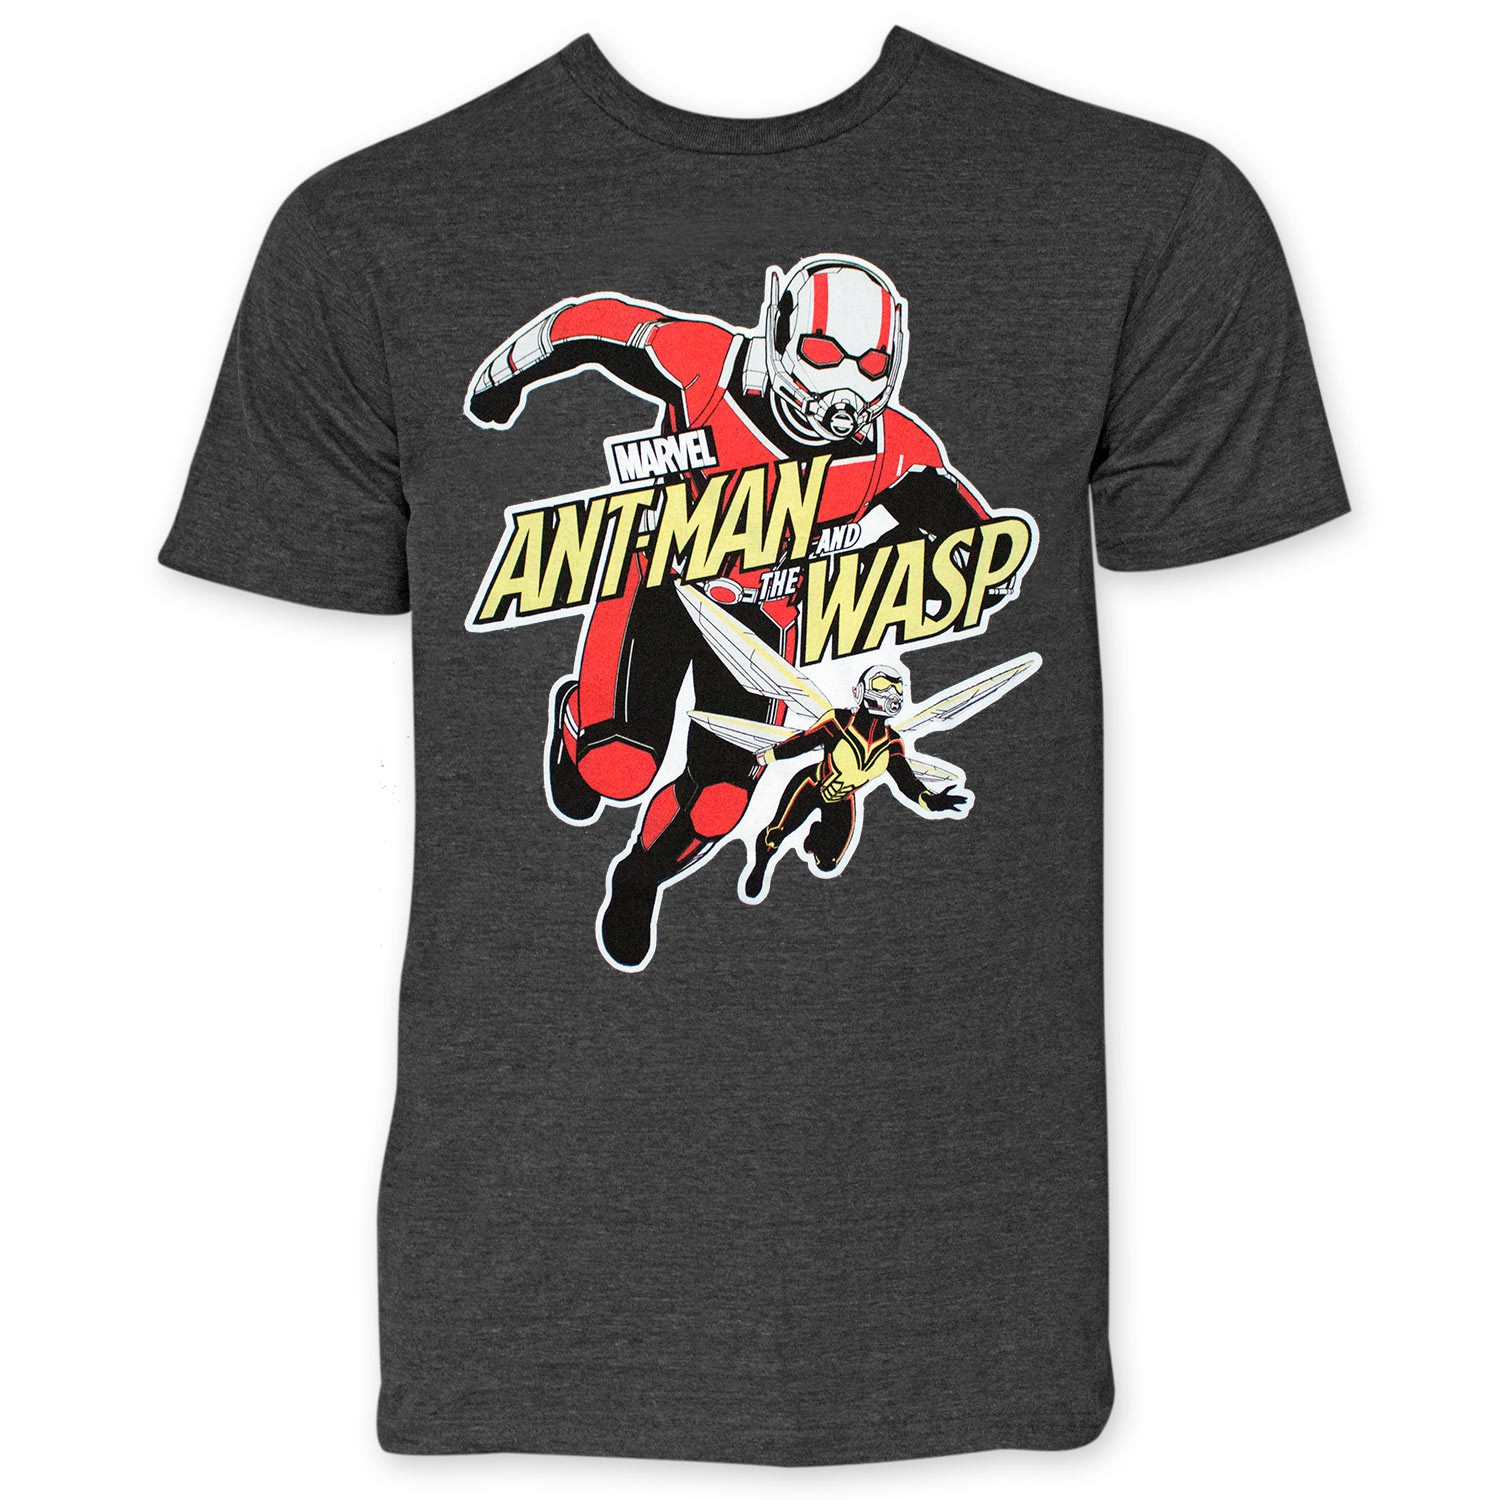 Ant-Man And The Wasp Attack Men's Grey T-Shirt